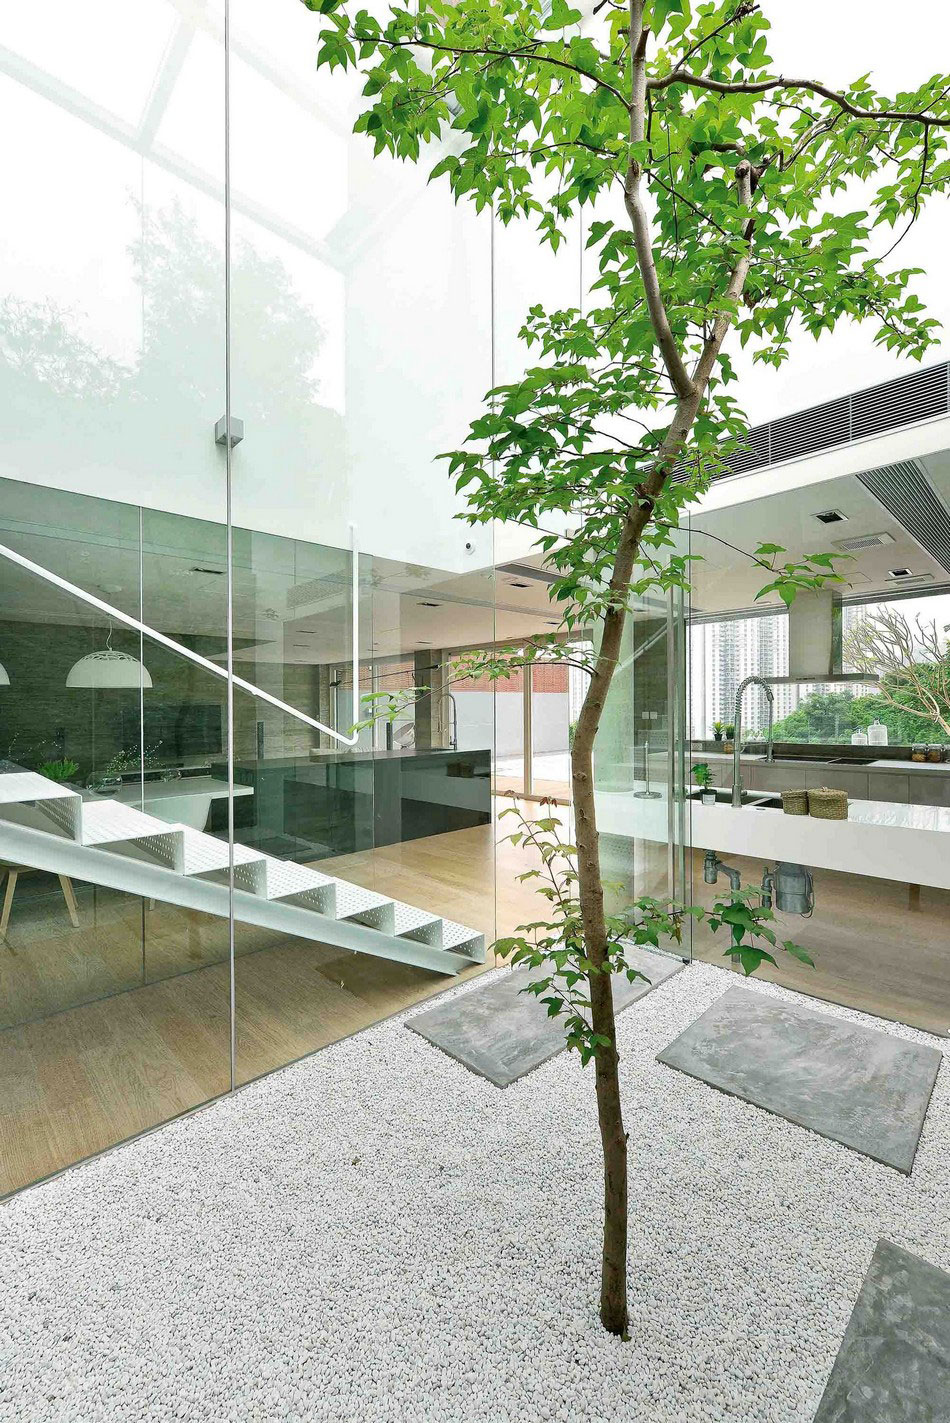 This Sustainable House in Hong Kong 8 This sustainable house in Hong Kong is definitely a great inspiration